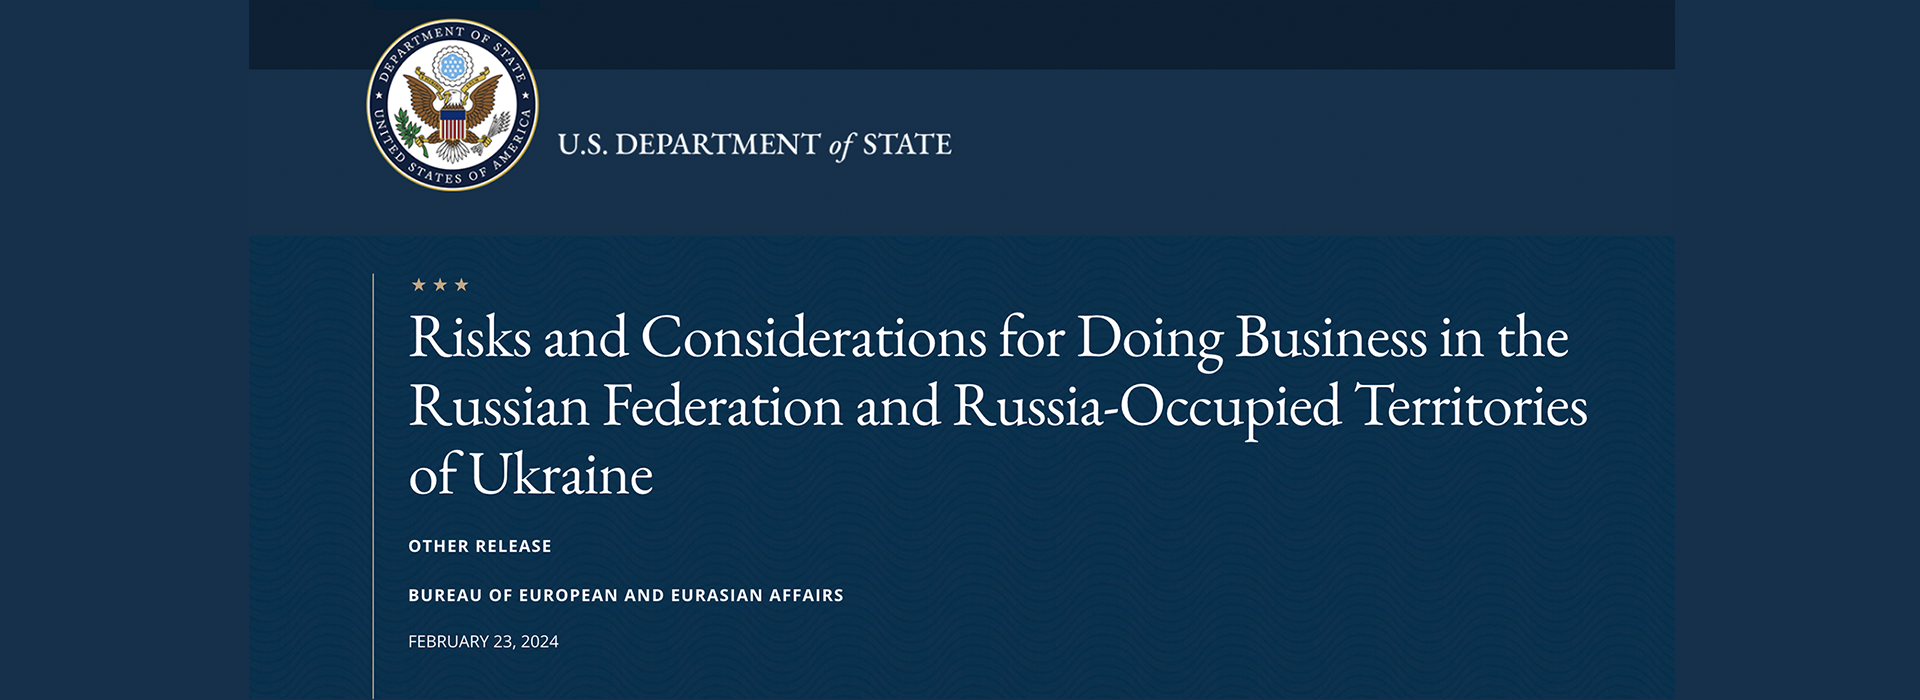 Risks for Doing Business in the Russian Federation – US State Department Latest